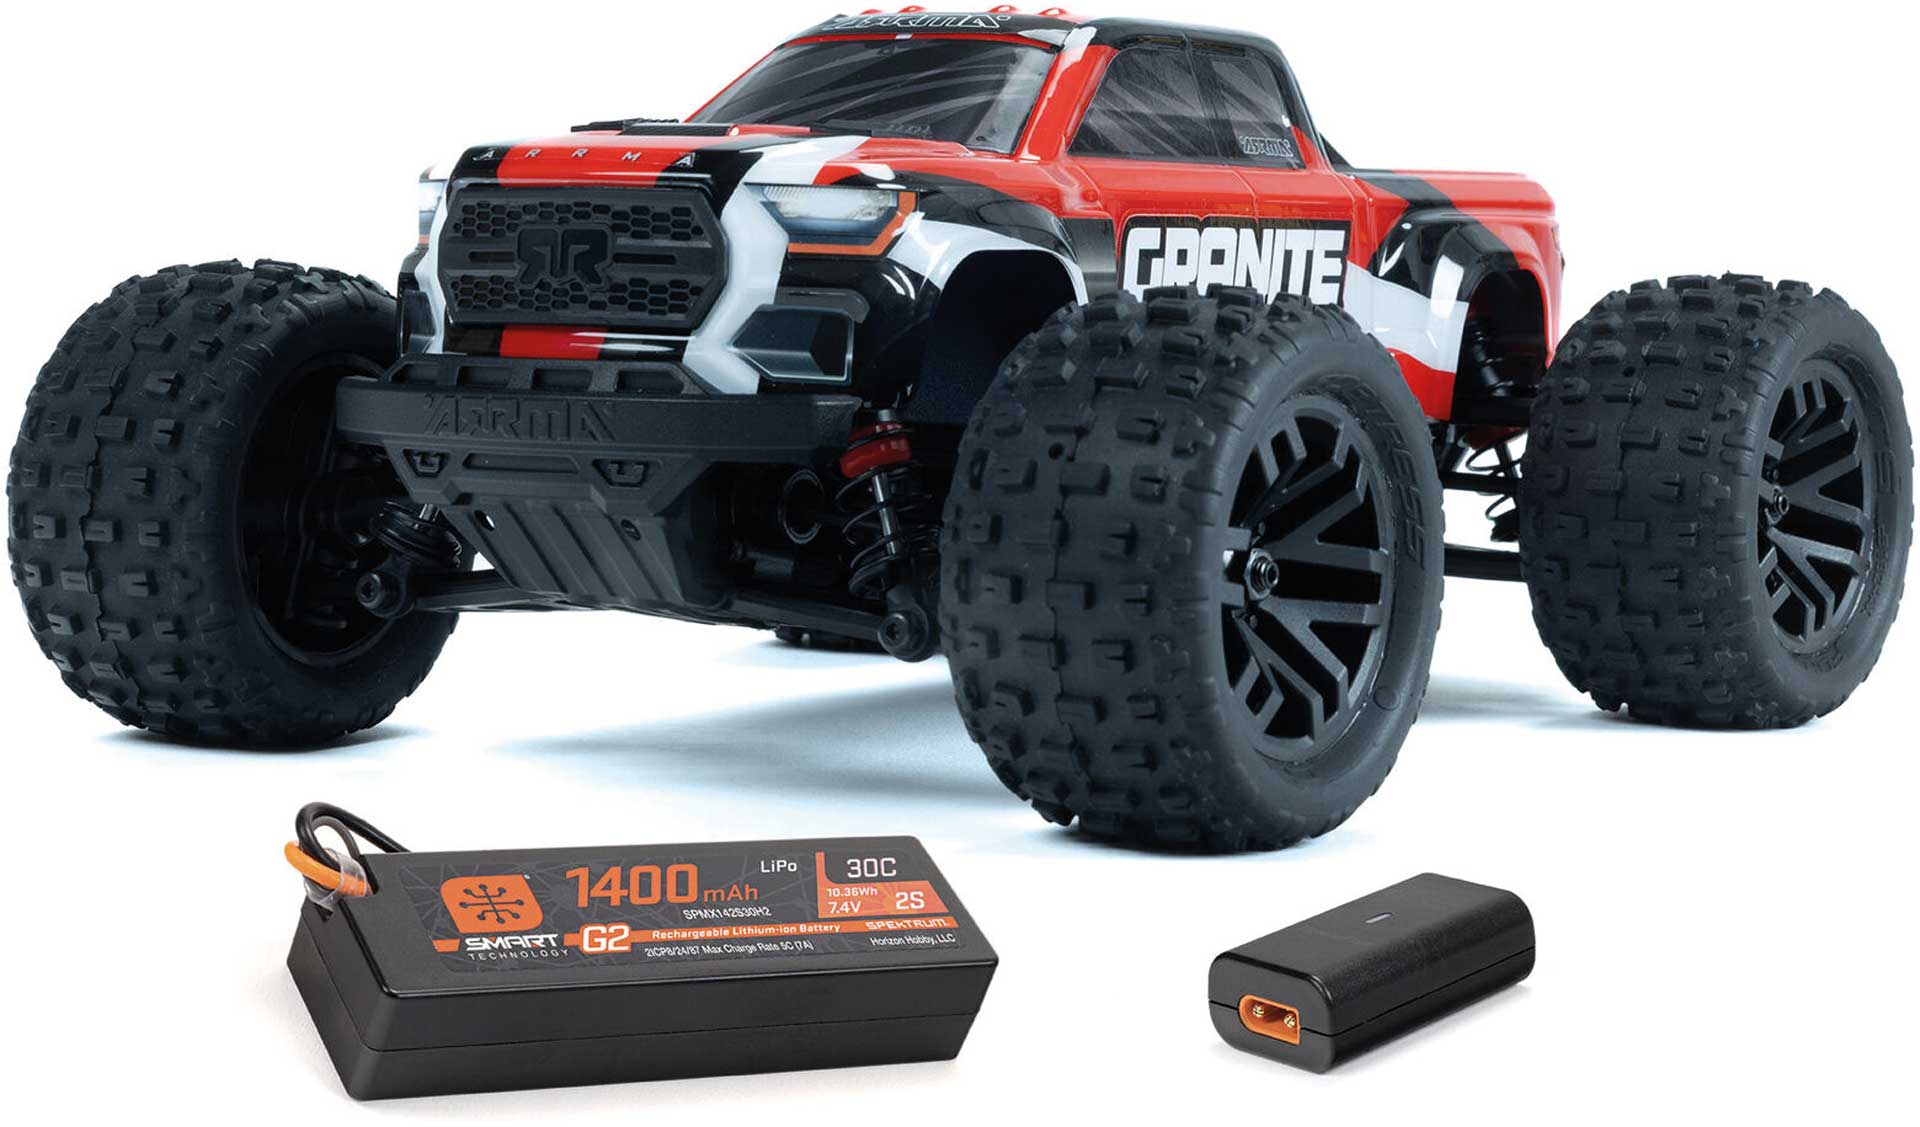 ARRMA GRANITE GROM 1/18 MEGA 380 Red Brushed 4x4 Monster Truck RTR incl. battery and charger